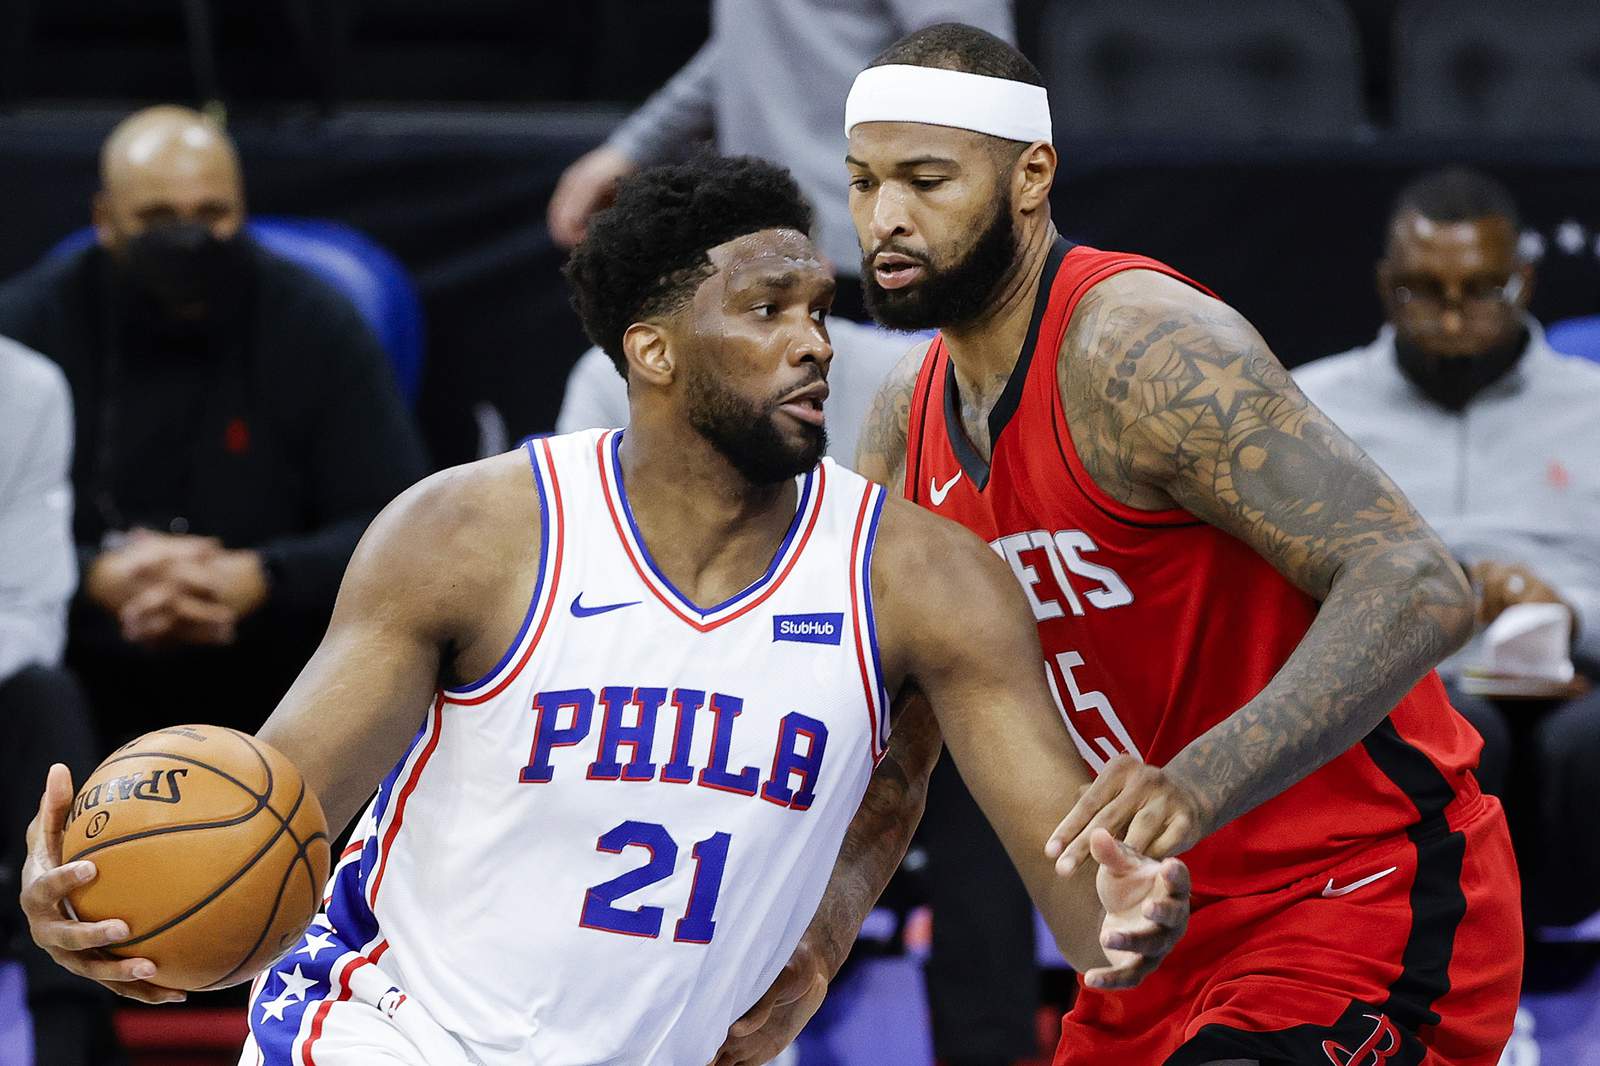 Embiid leads 76ers past short-handed Rockets 118-113